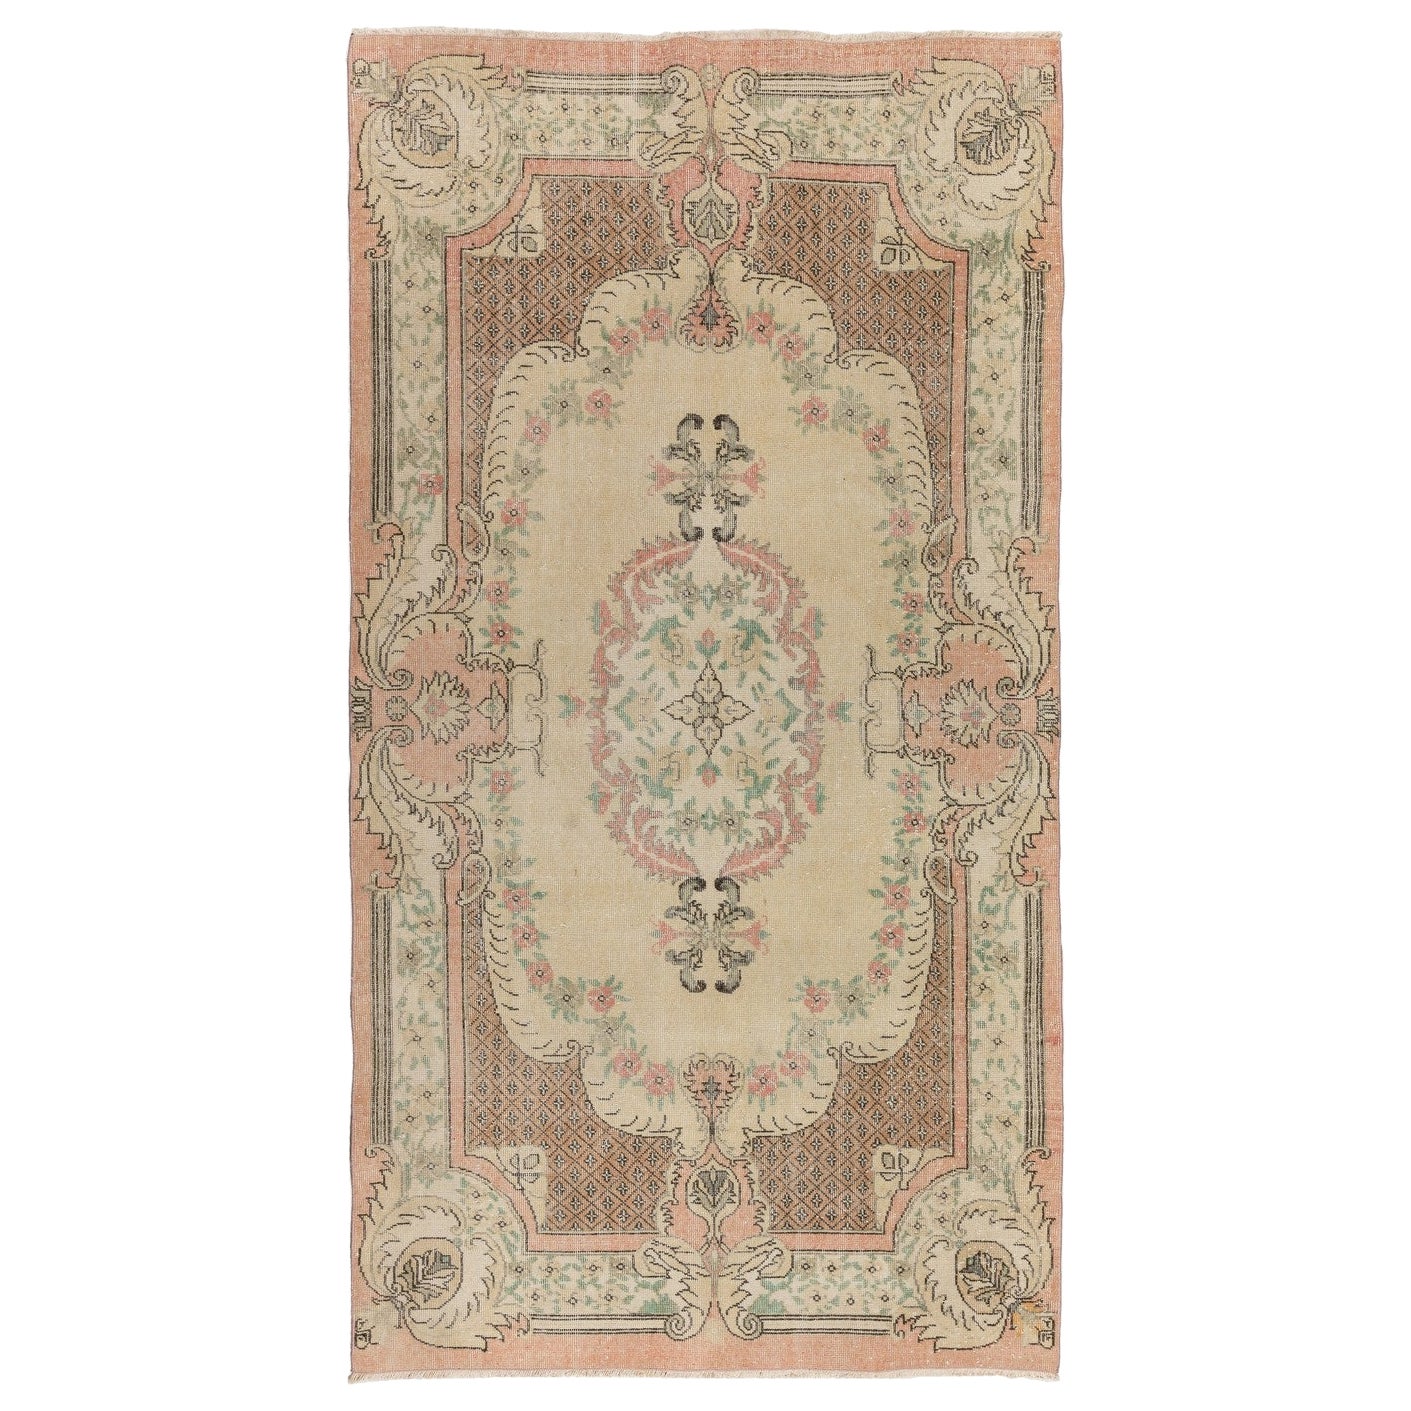 5.6x9.7 Ft Aubusson Inspired Vintage Handmade Turkish Rug in Peach & Pale Yellow For Sale